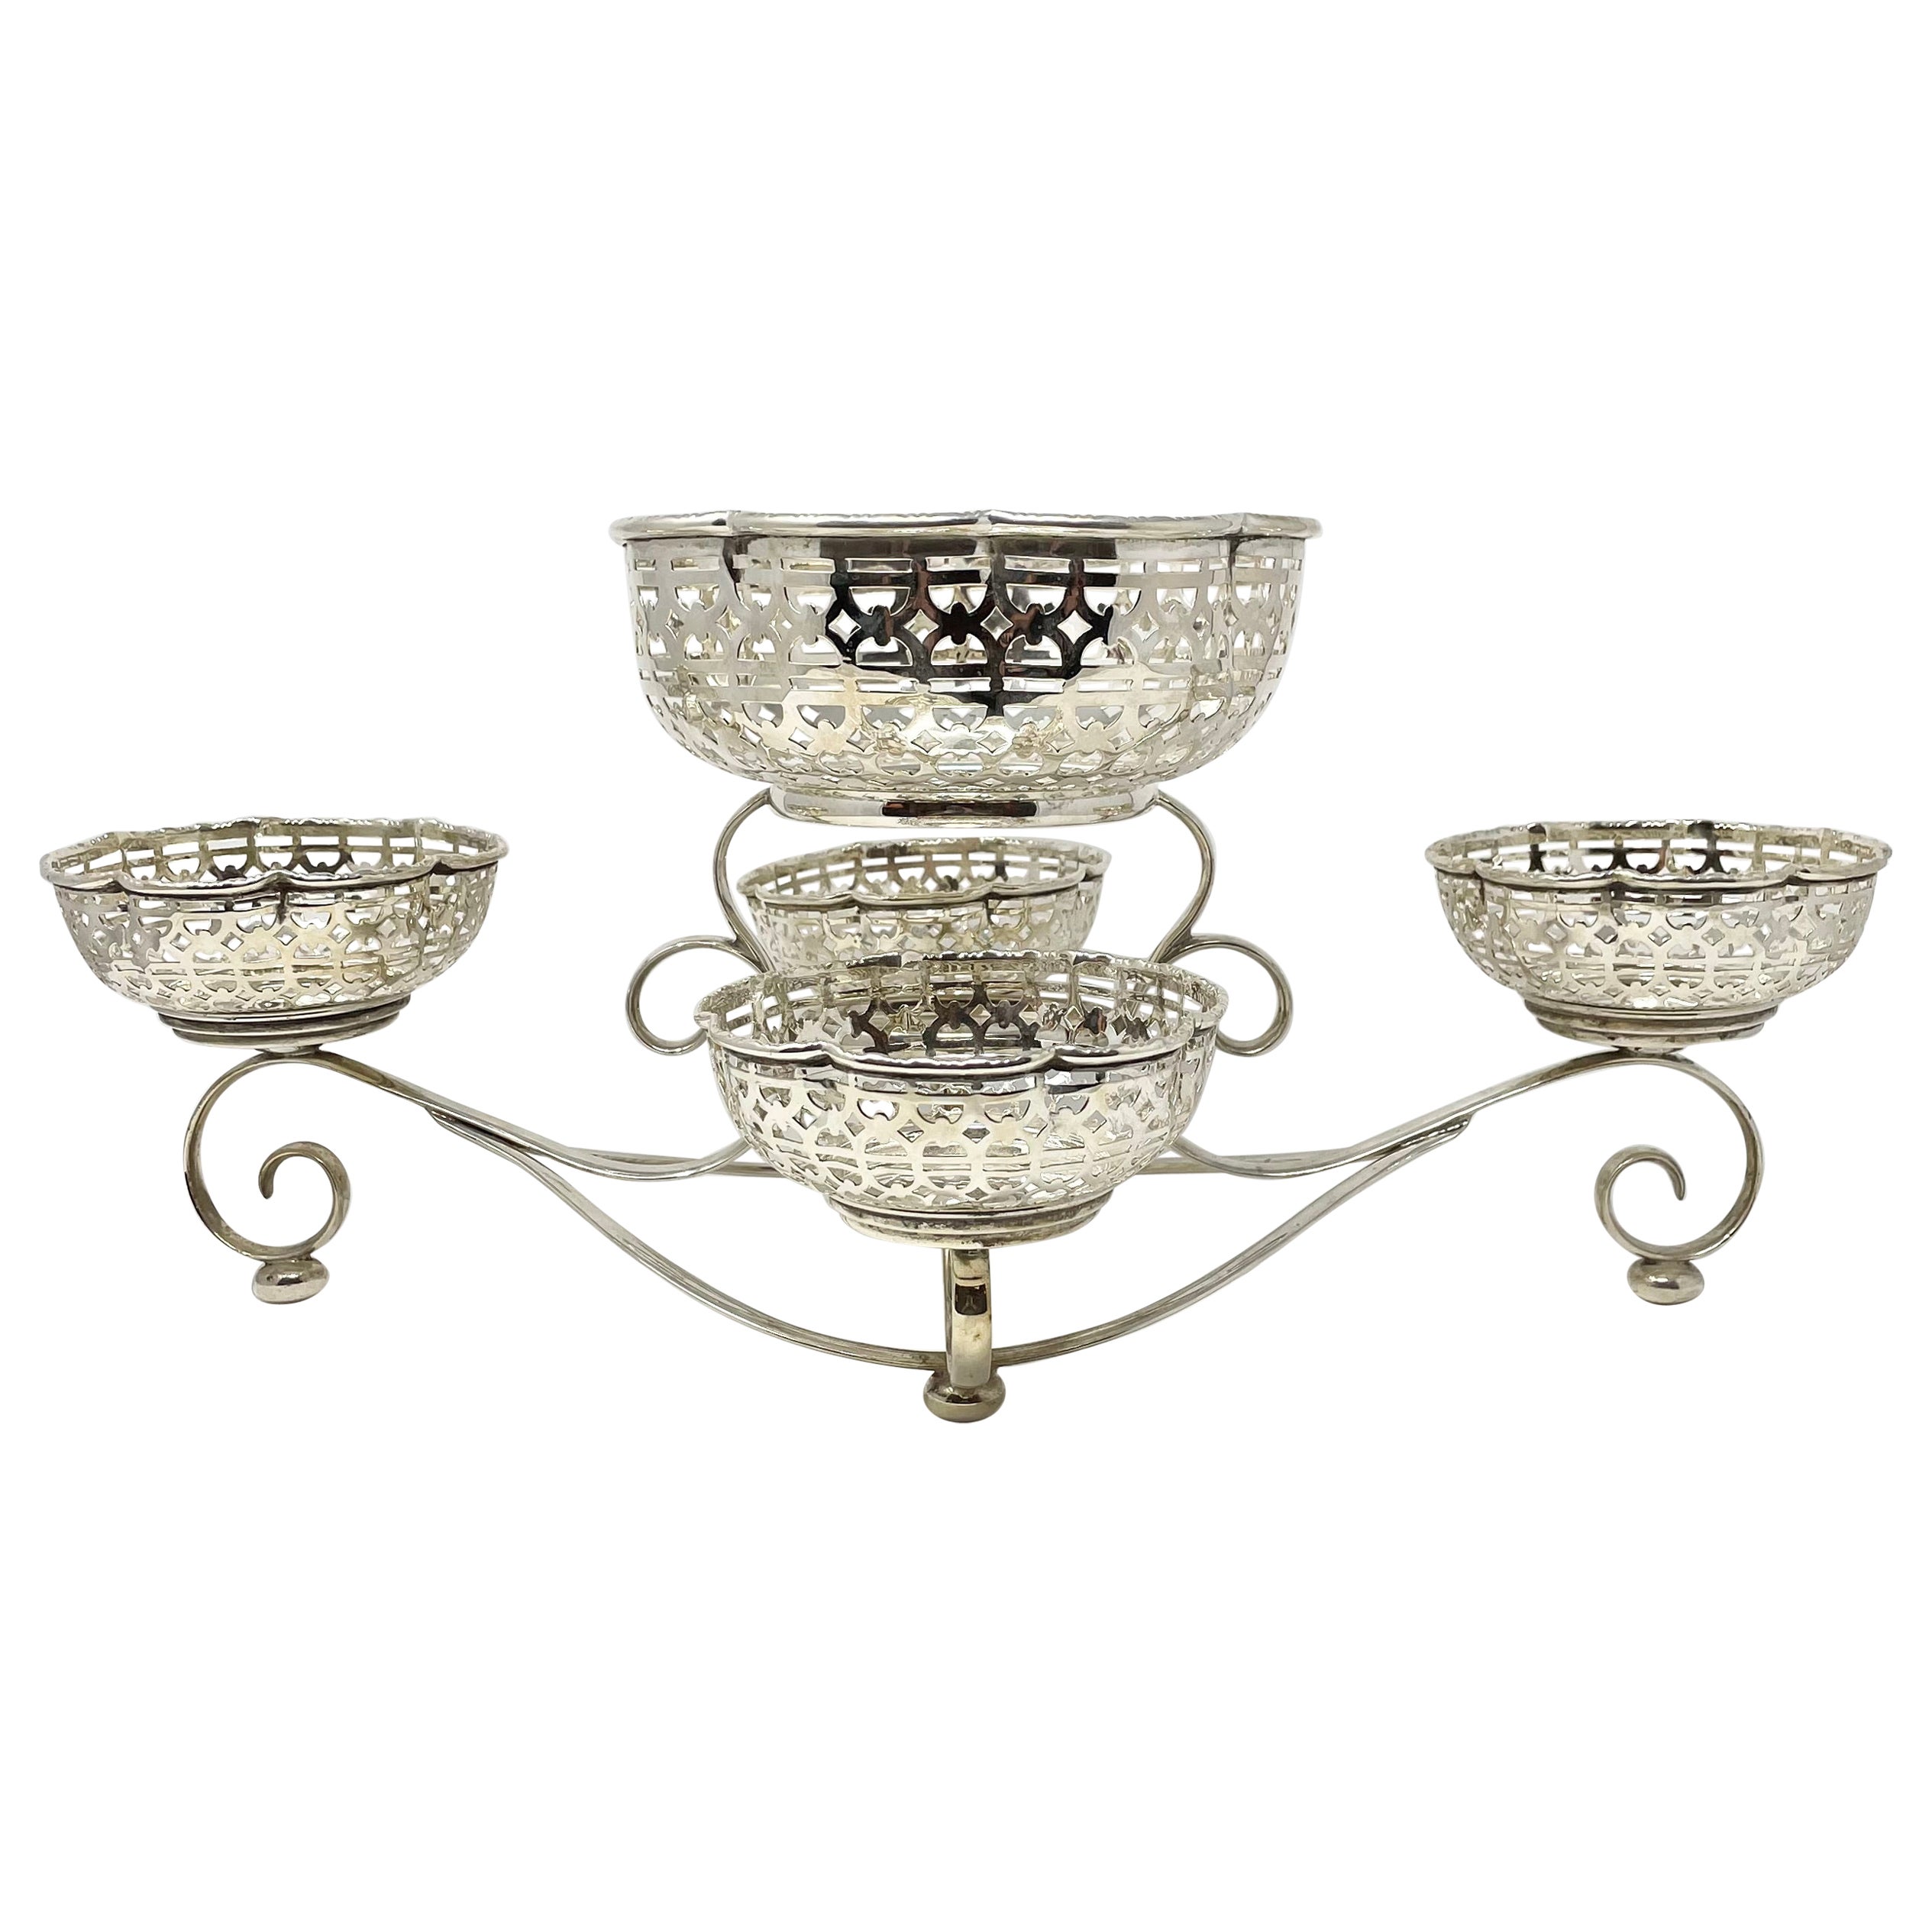 Antique English Silver-Plated 5 Piece Floral Epergne with Piercework, Circa 1900